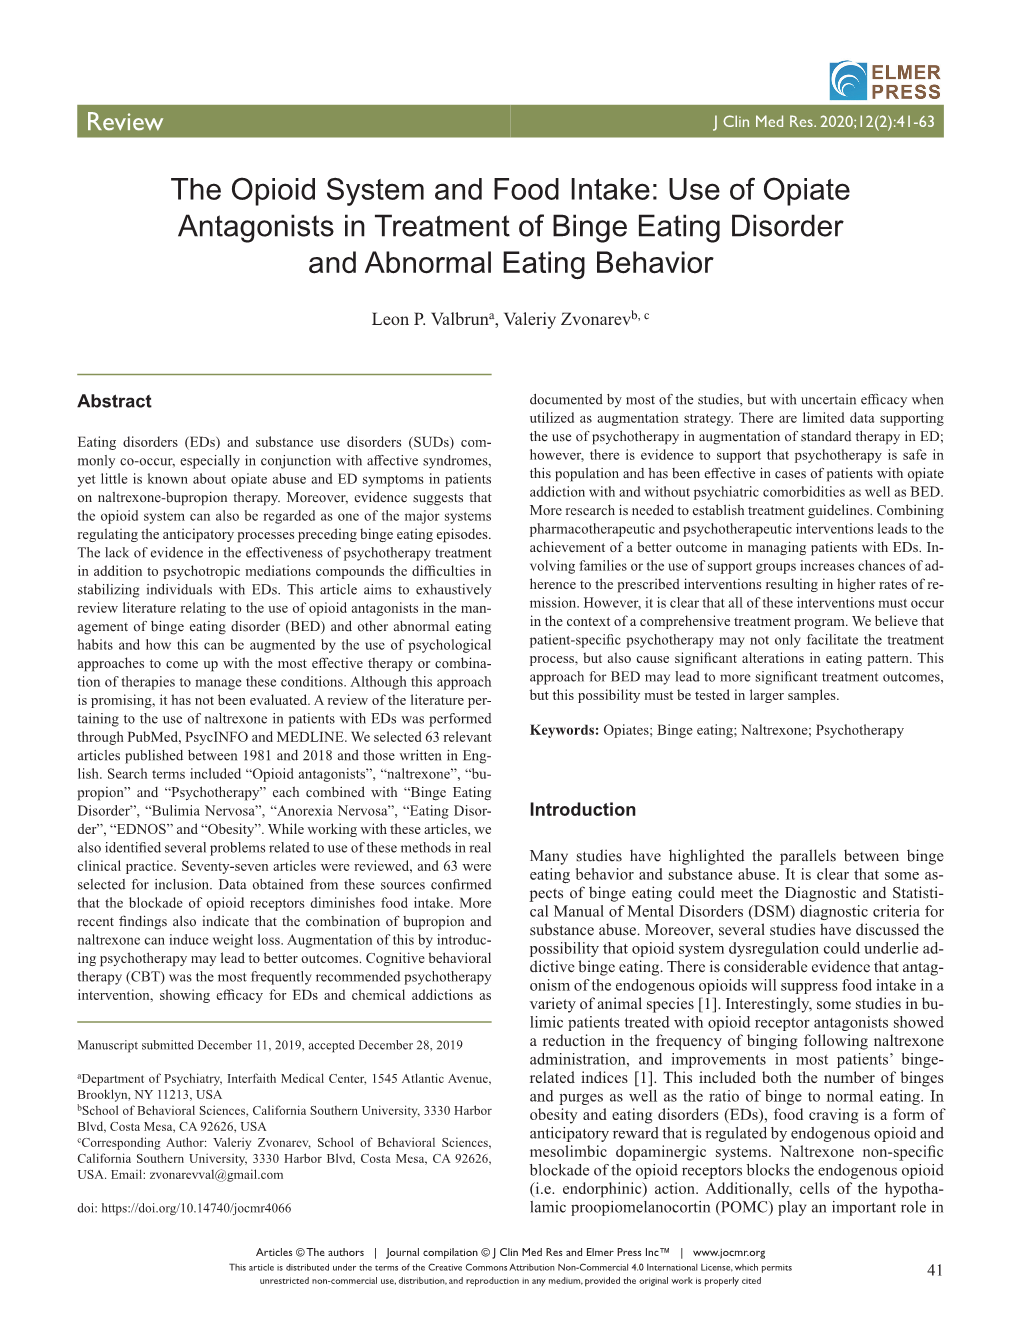 The Opioid System and Food Intake: Use of Opiate Antagonists in Treatment of Binge Eating Disorder and Abnormal Eating Behavior